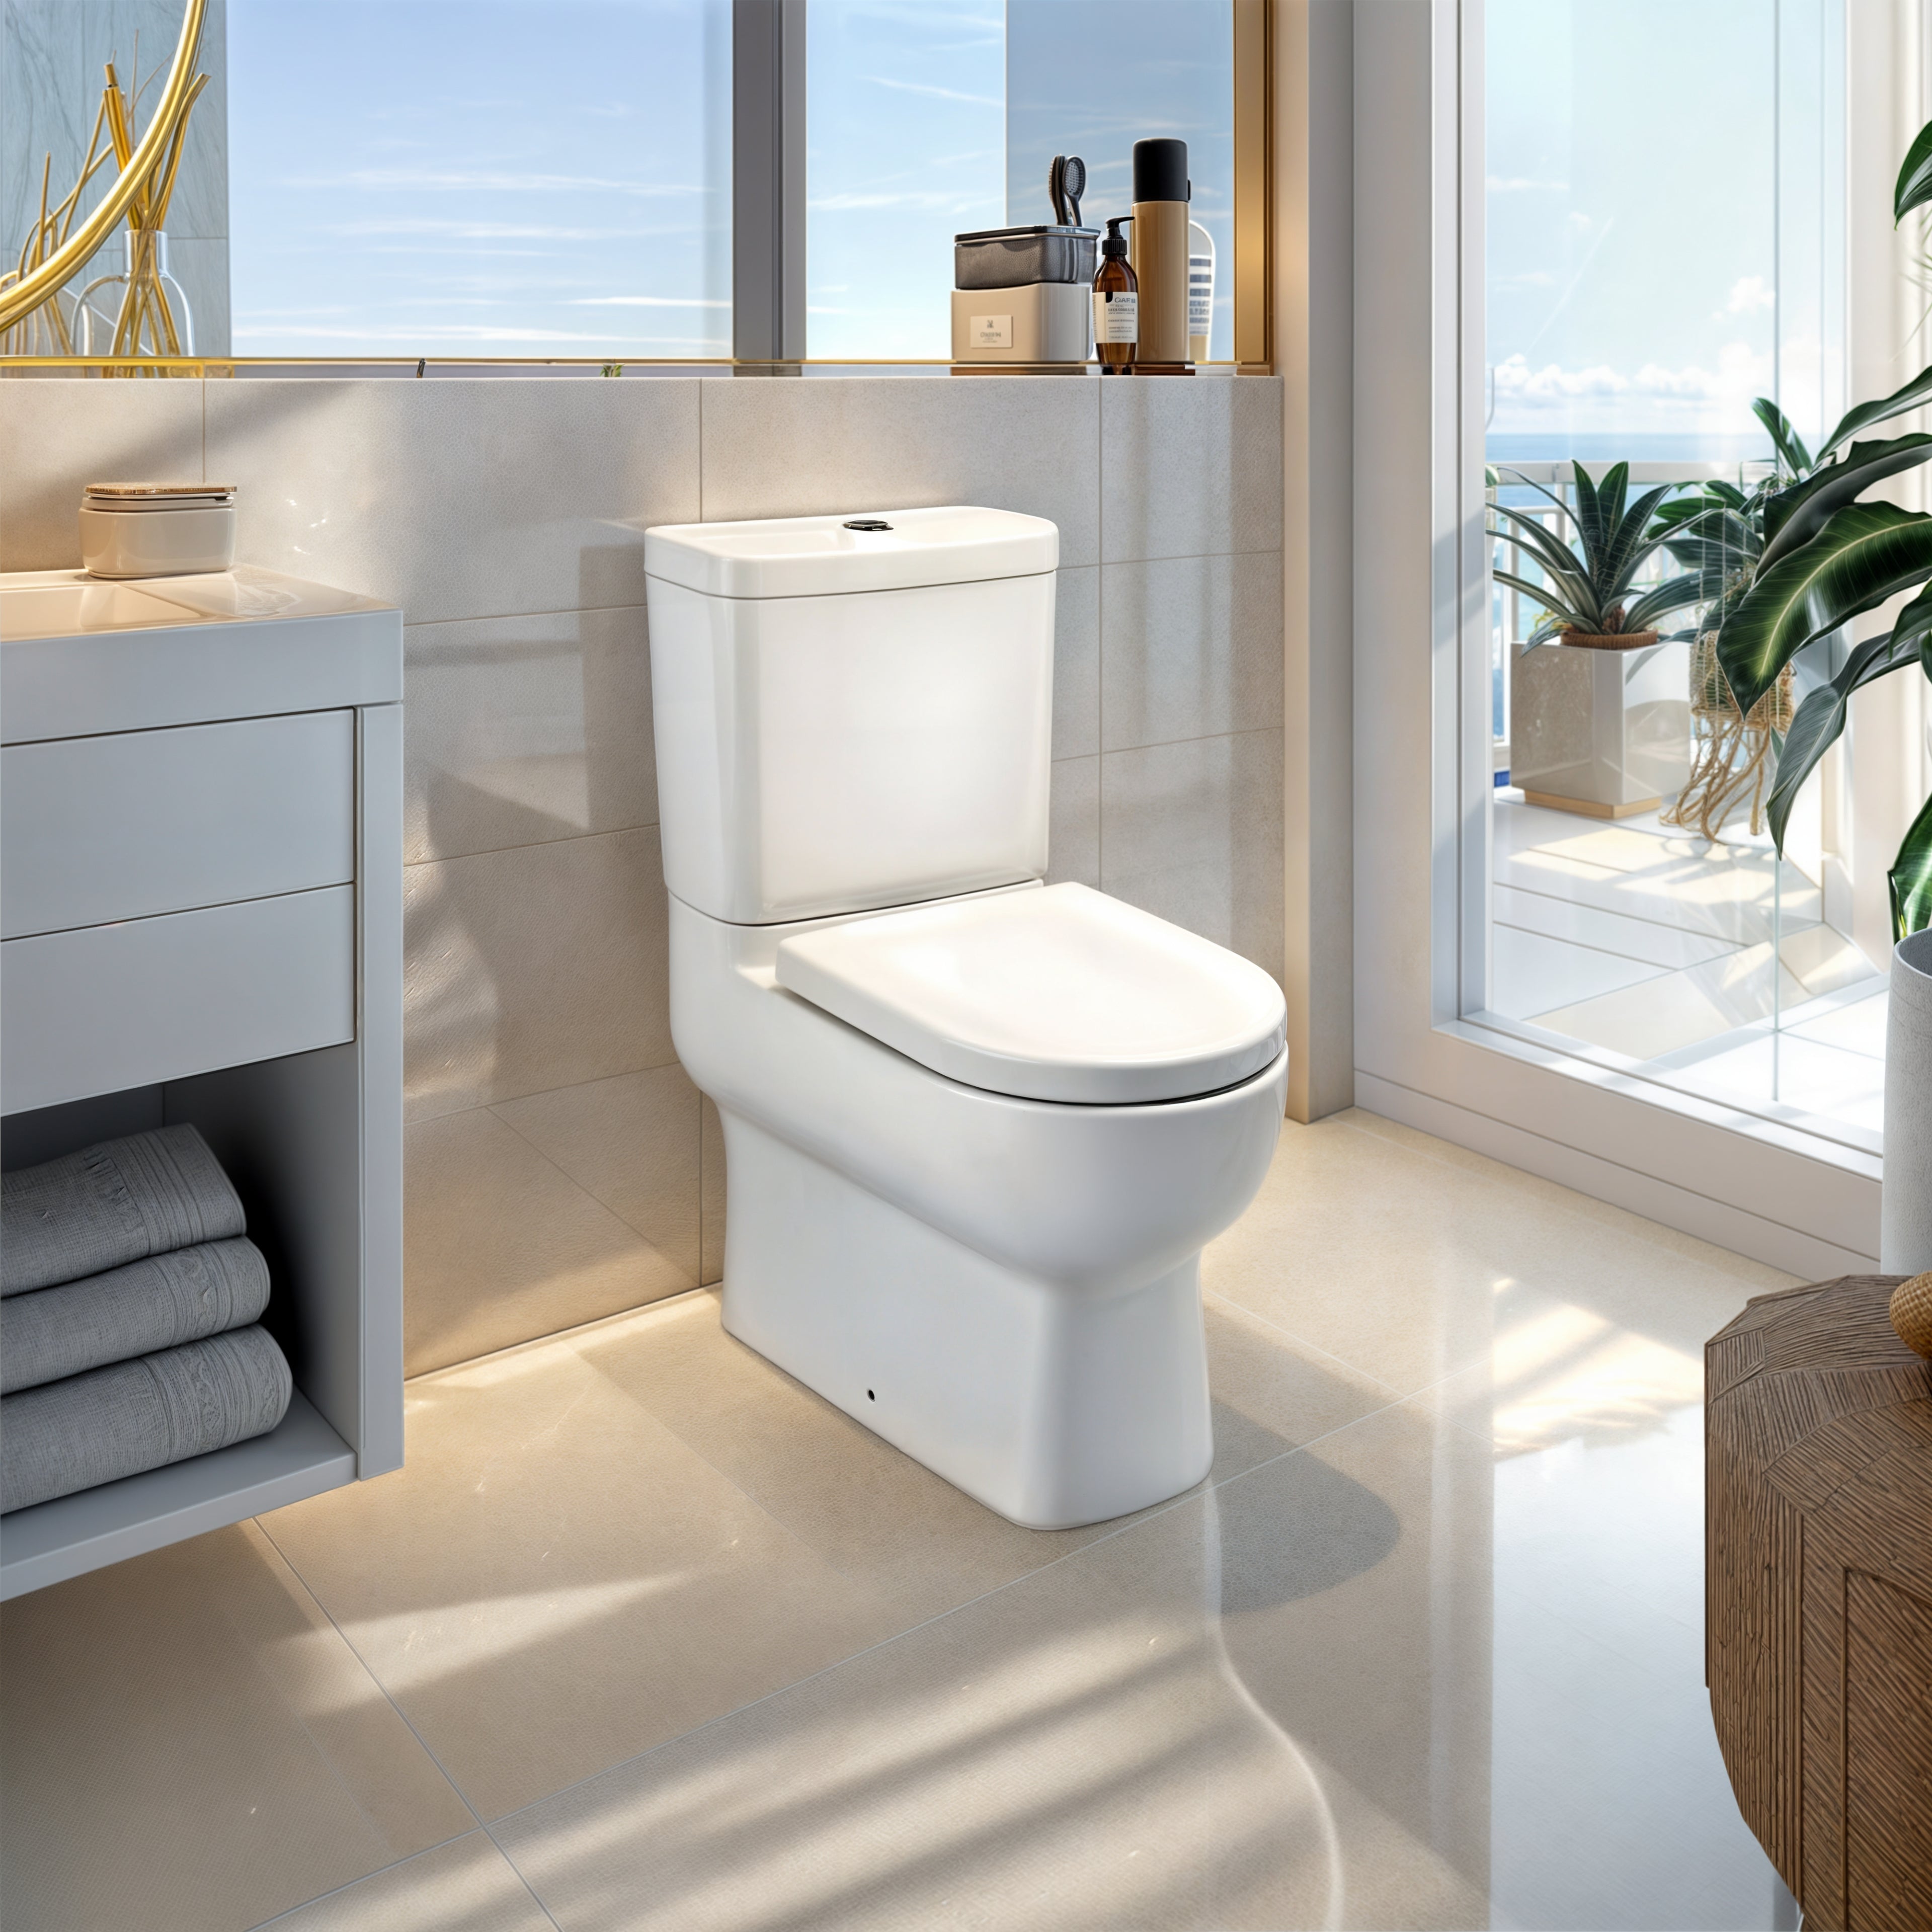 KOHLER REACH COMPACT BACK TO WALL REAR ENTRY TOILET SUITE GLOSS WHITE